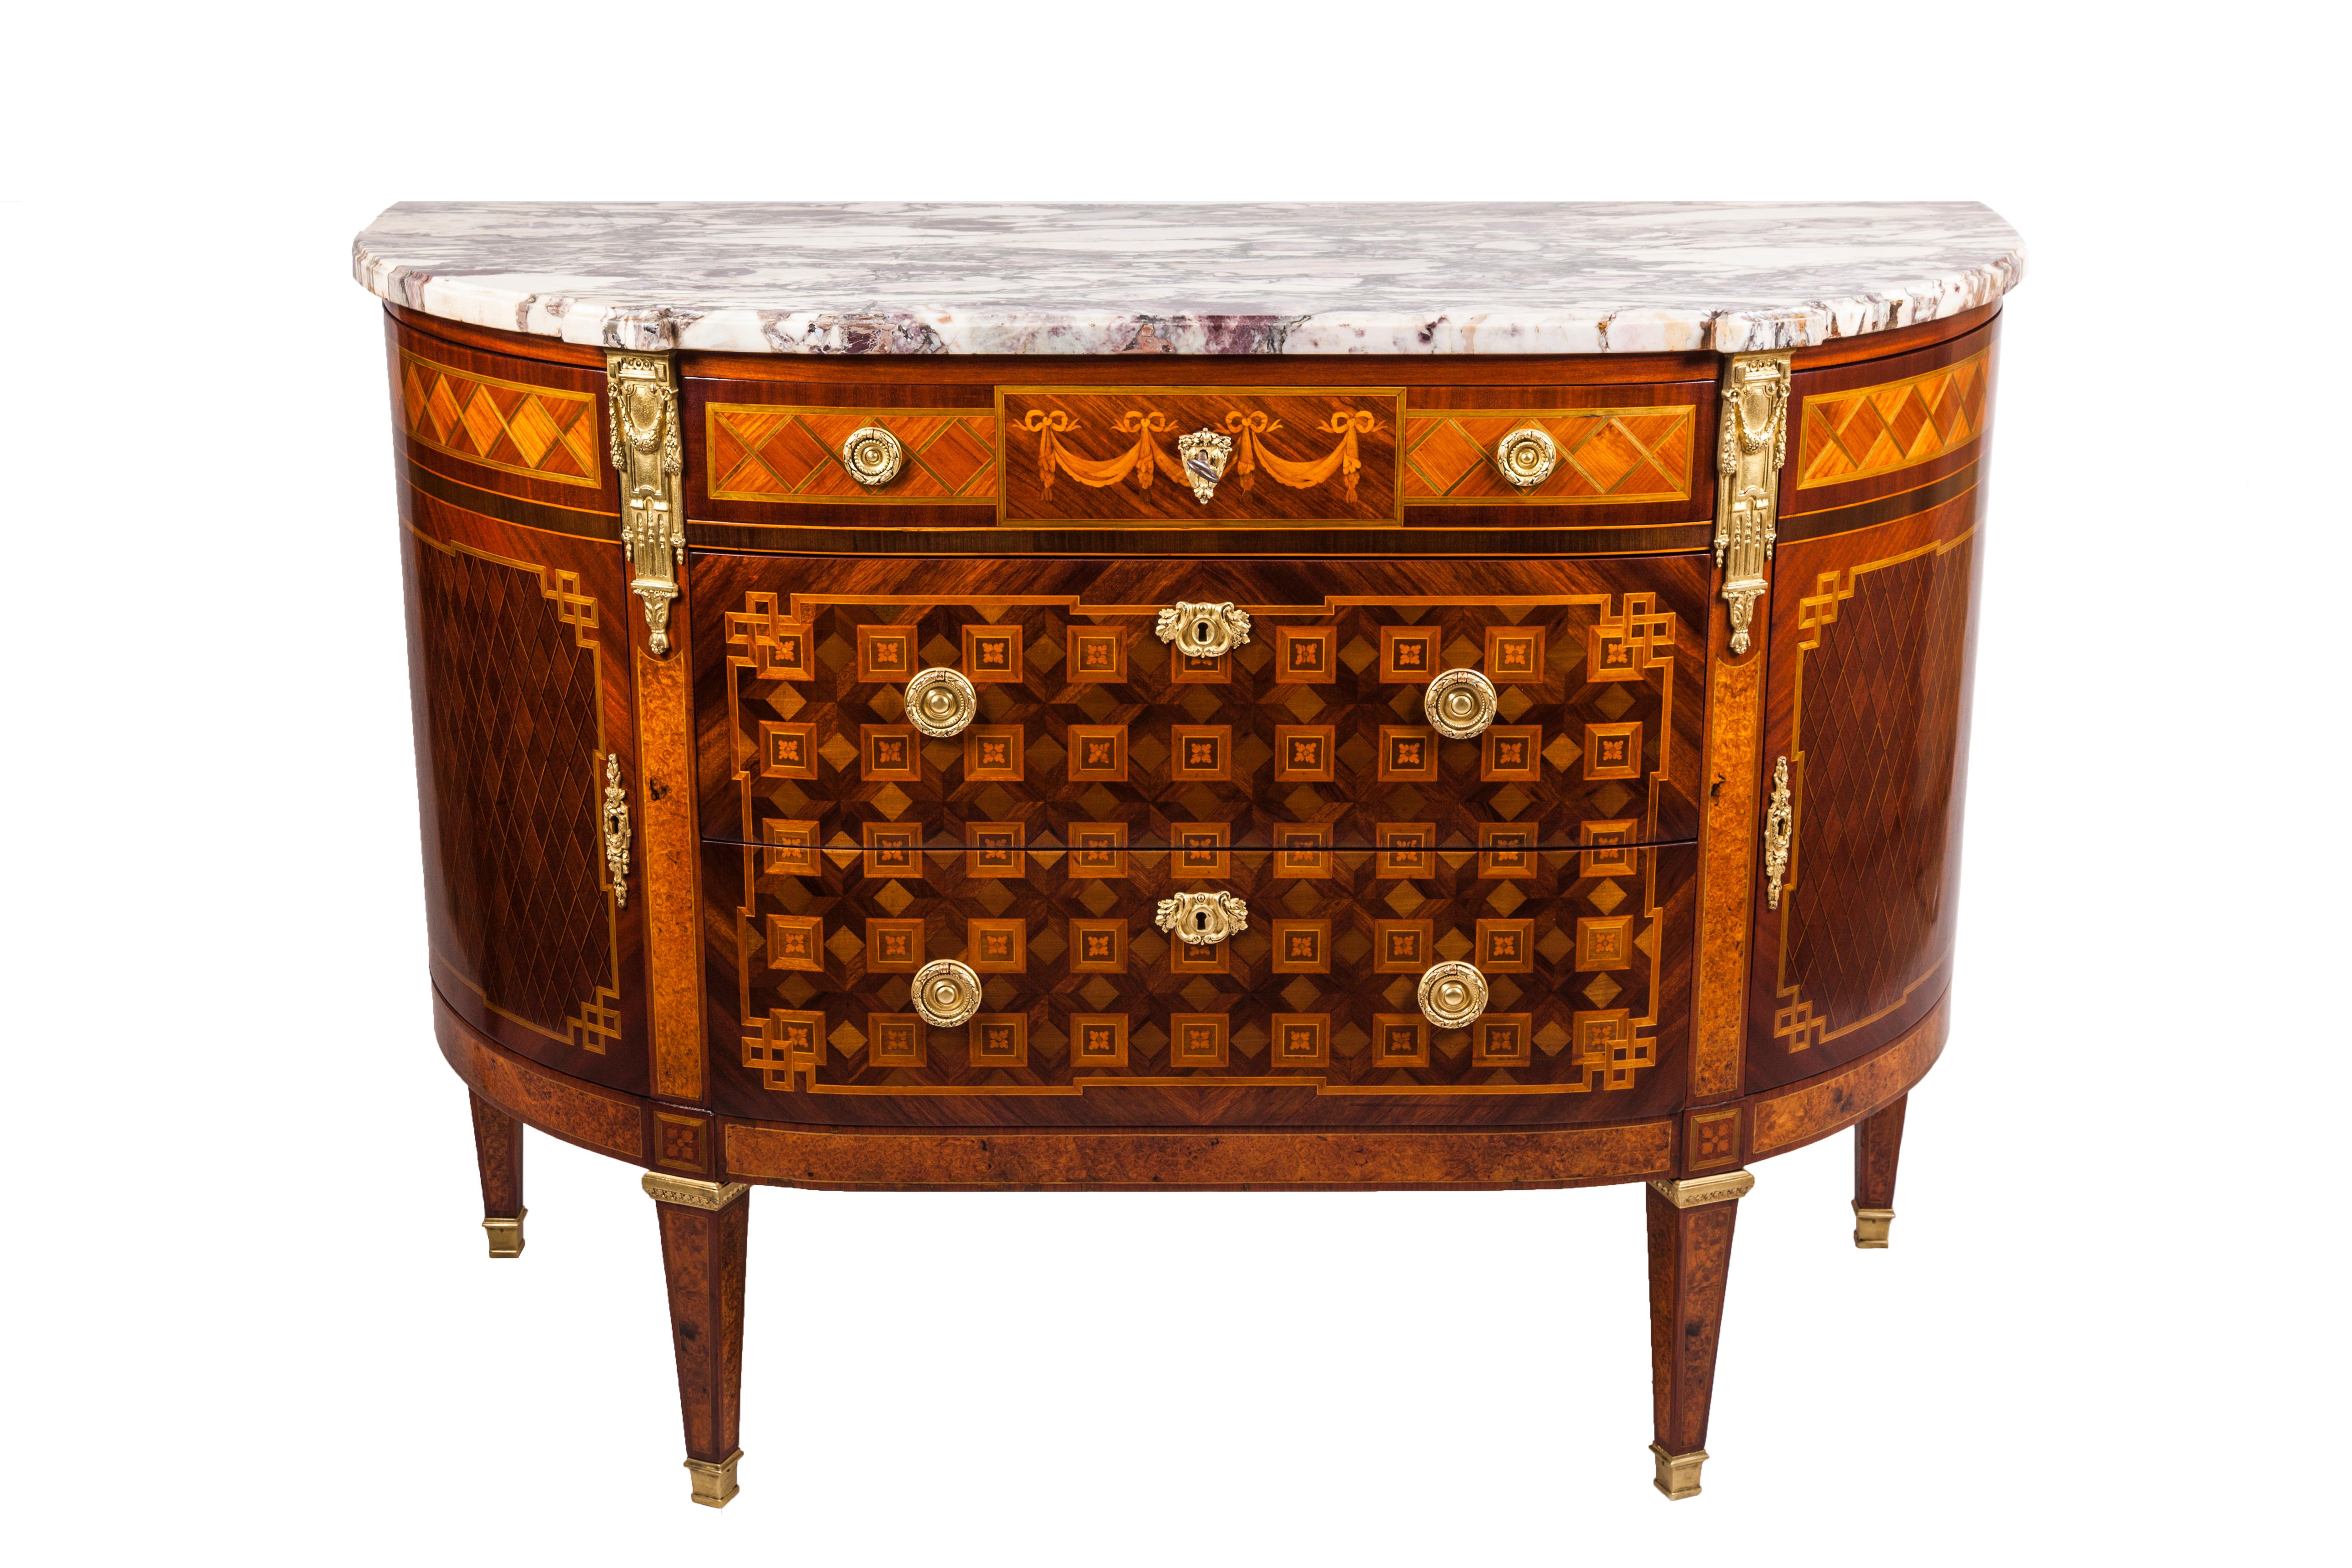 French dresser of the late 19th century. Furniture in Louis XVI style characterized by a pleasant geometric inlay made of rosewood, mahogany, maple, fruitwood, colored woods. 
Chest composed by two central drawers, three small drawers on the top